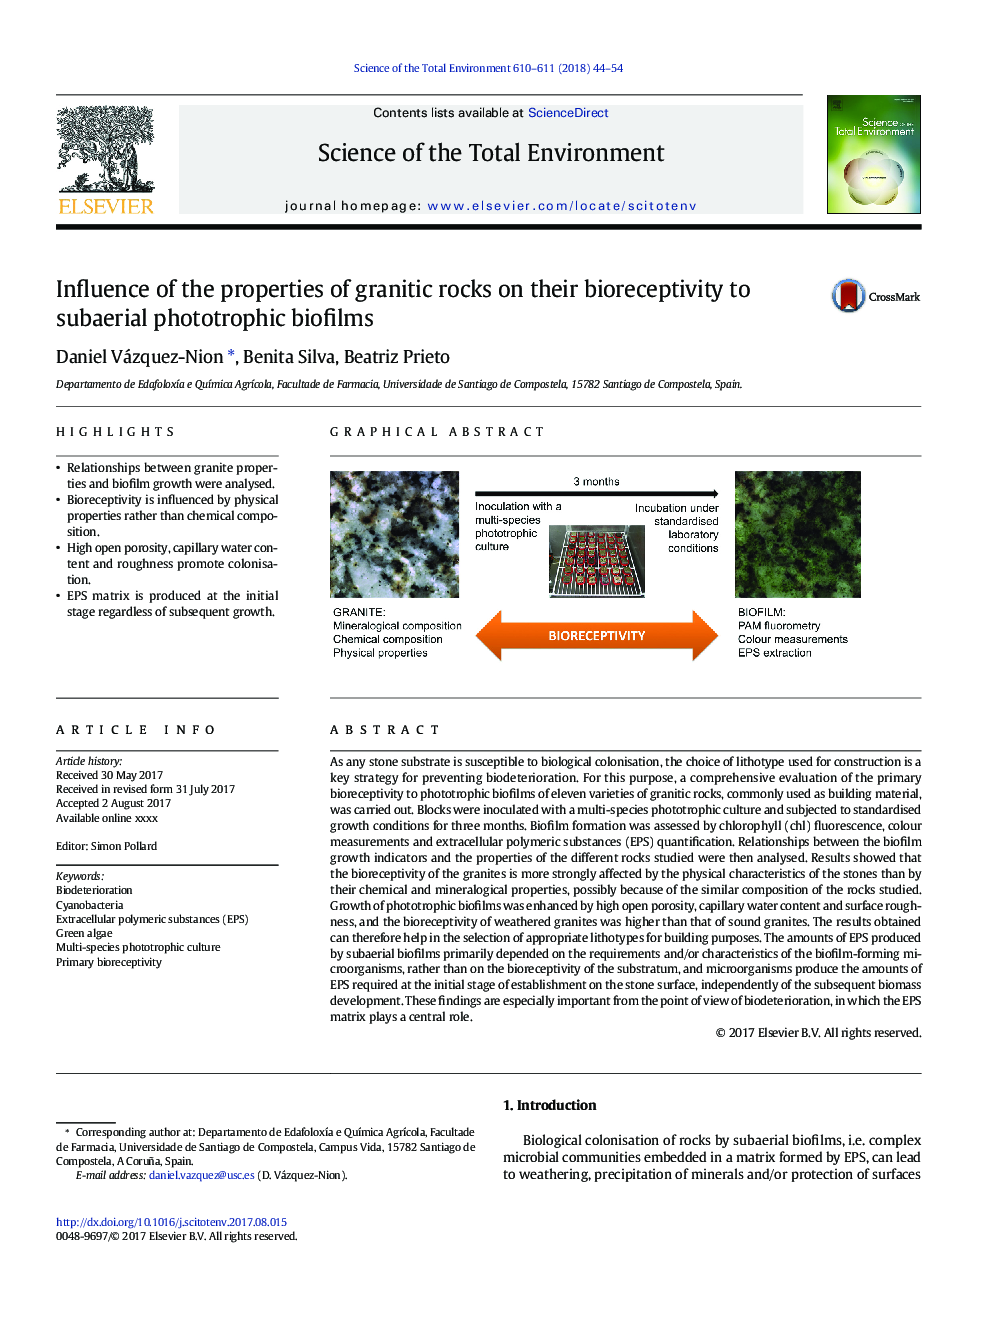 Influence of the properties of granitic rocks on their bioreceptivity to subaerial phototrophic biofilms